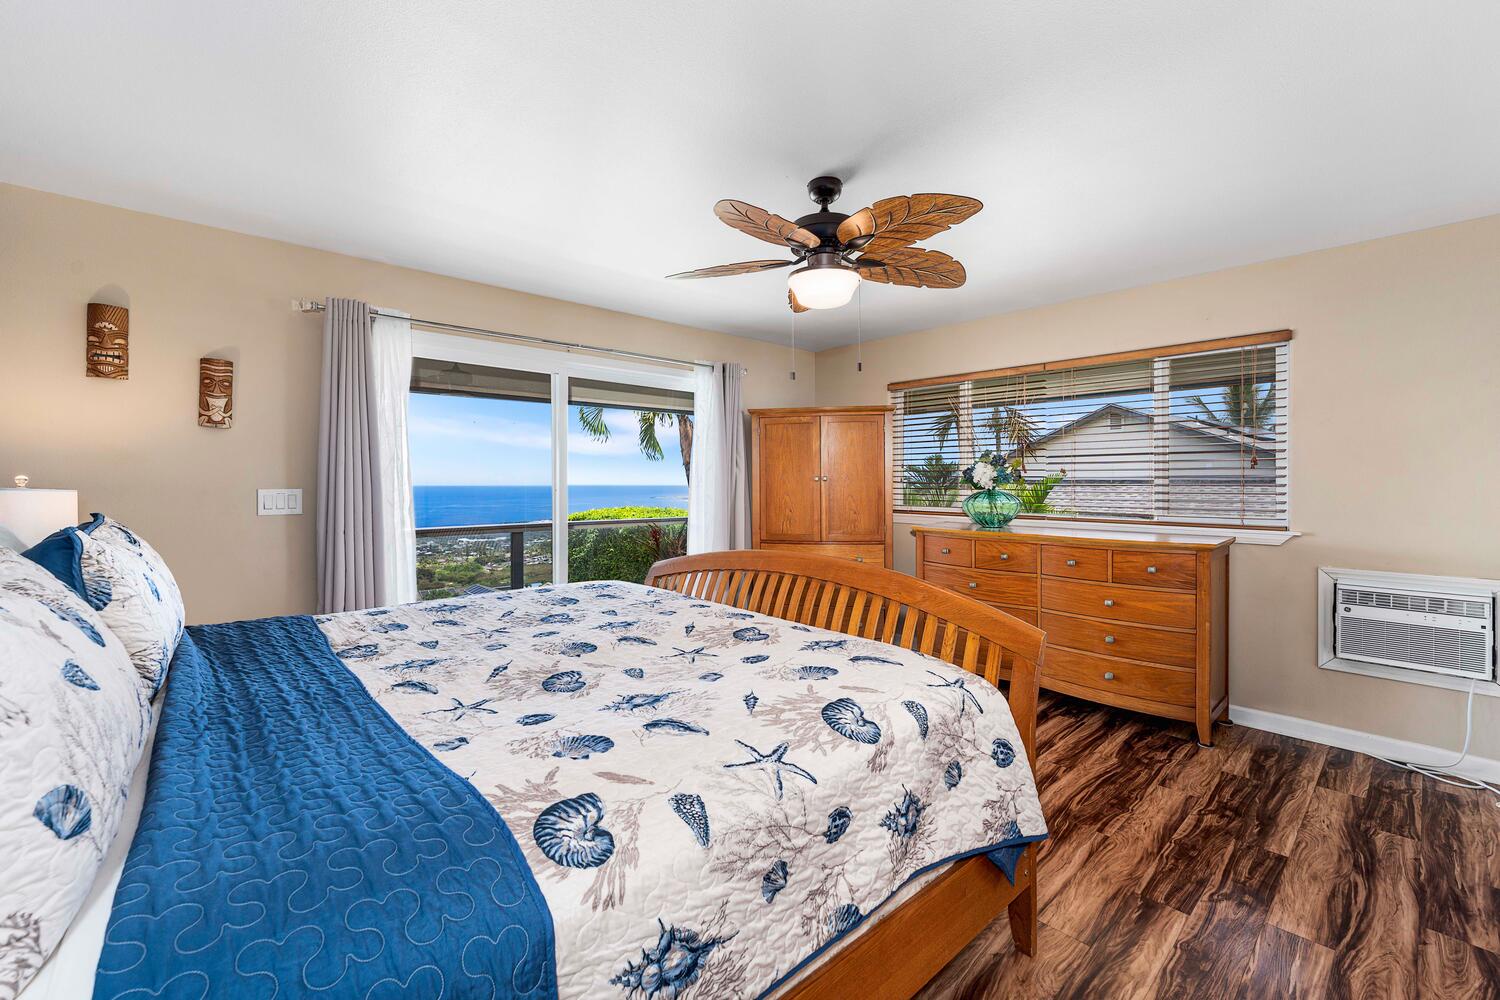 Kailua Kona Vacation Rentals, Honu O Kai (Turtle of the Sea) - The Primary Suite with ocean views and lanai access and window A/C.